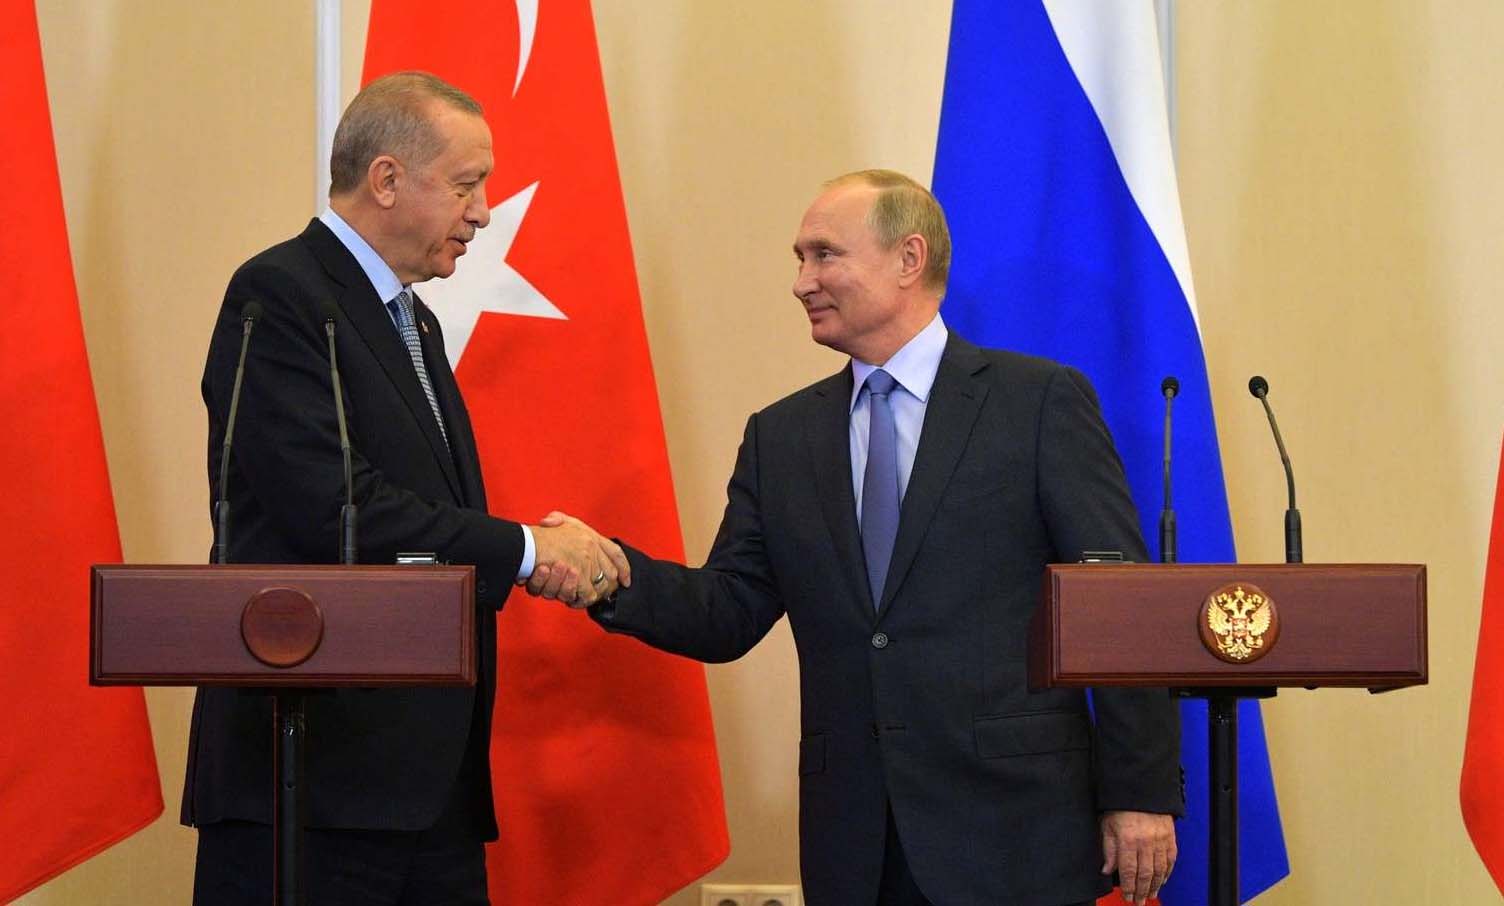 The deal cements Russia and Turkey's roles as main foreign players in Syria